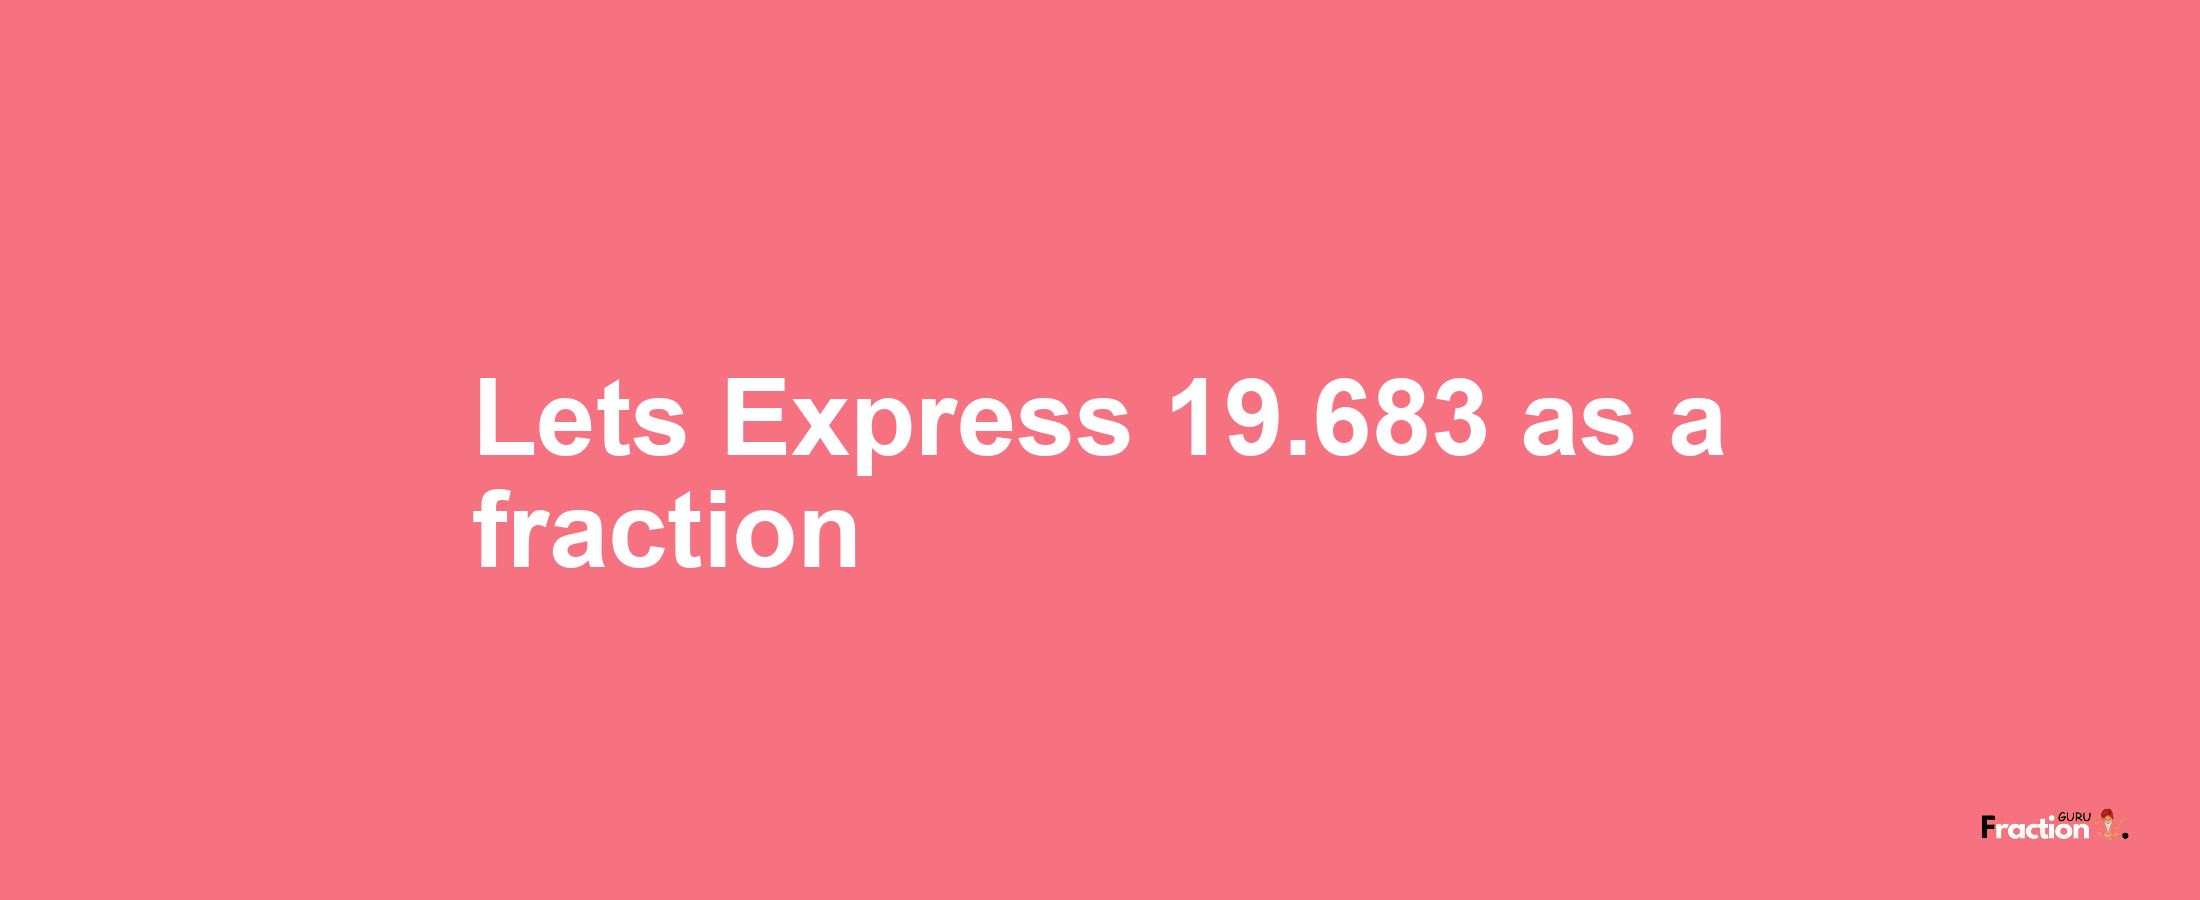 Lets Express 19.683 as afraction